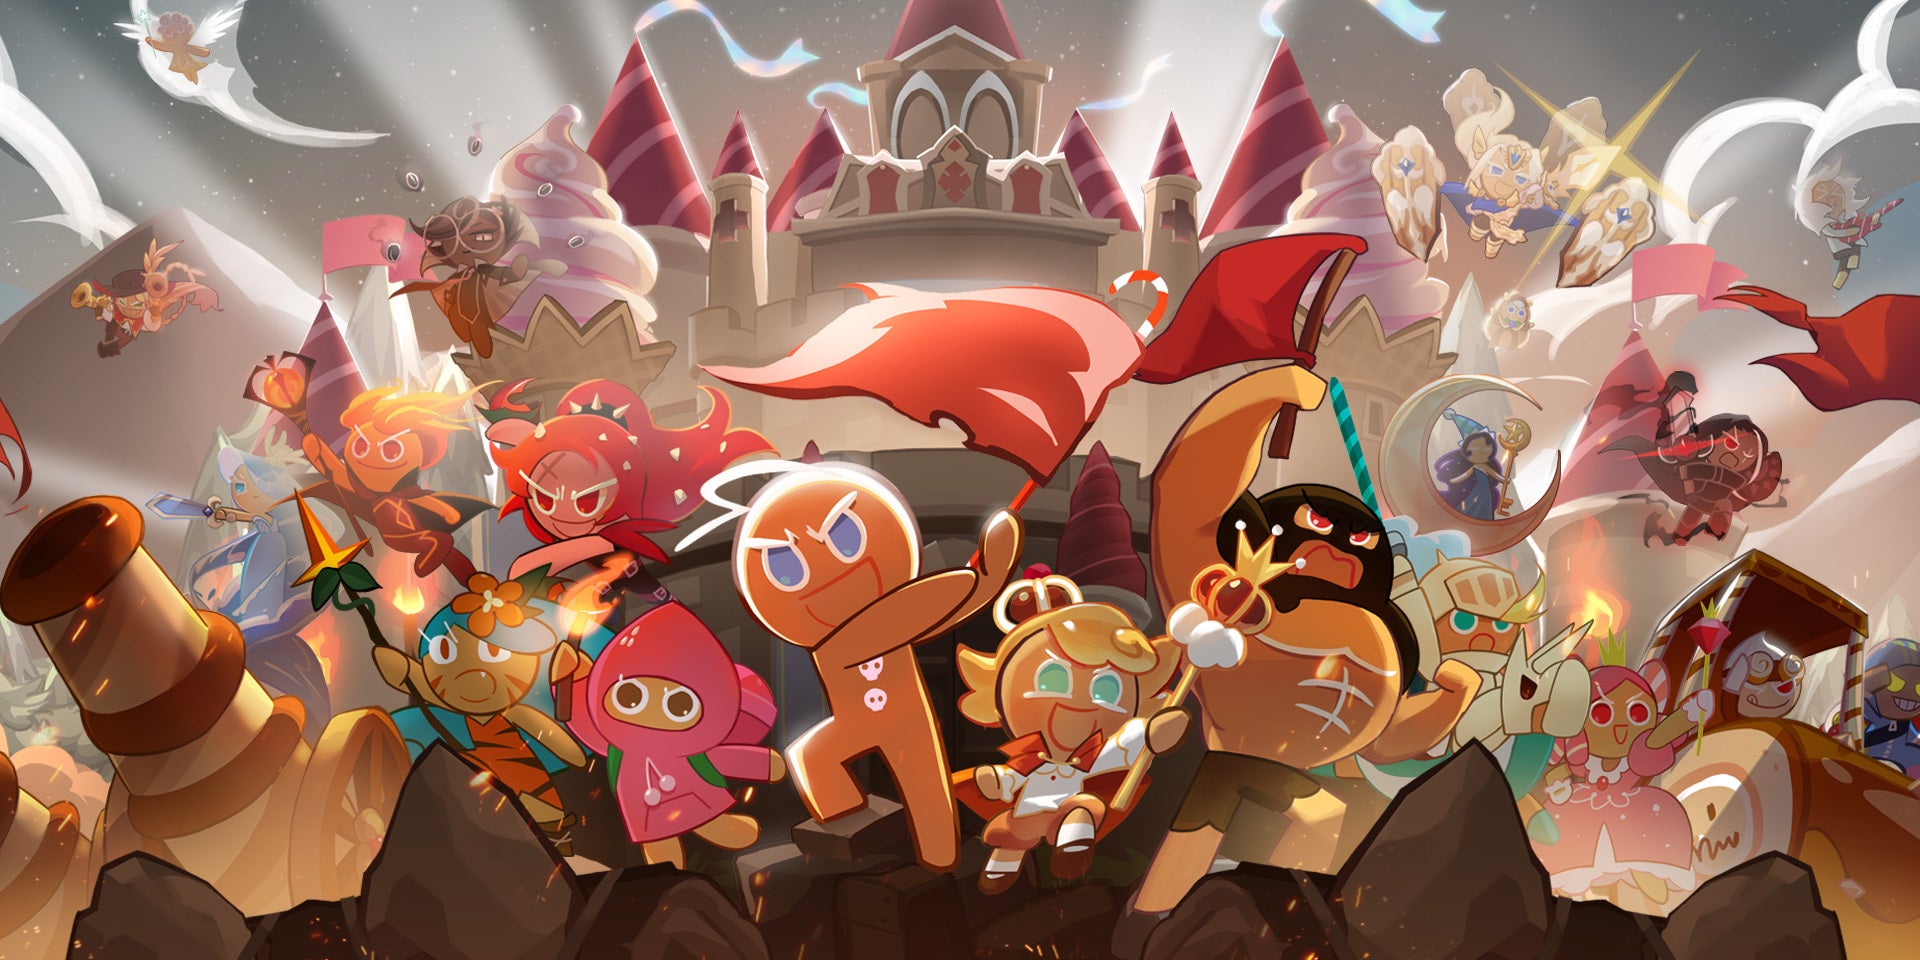 Characters from Cookie Run: Kingdom defending their kingdom